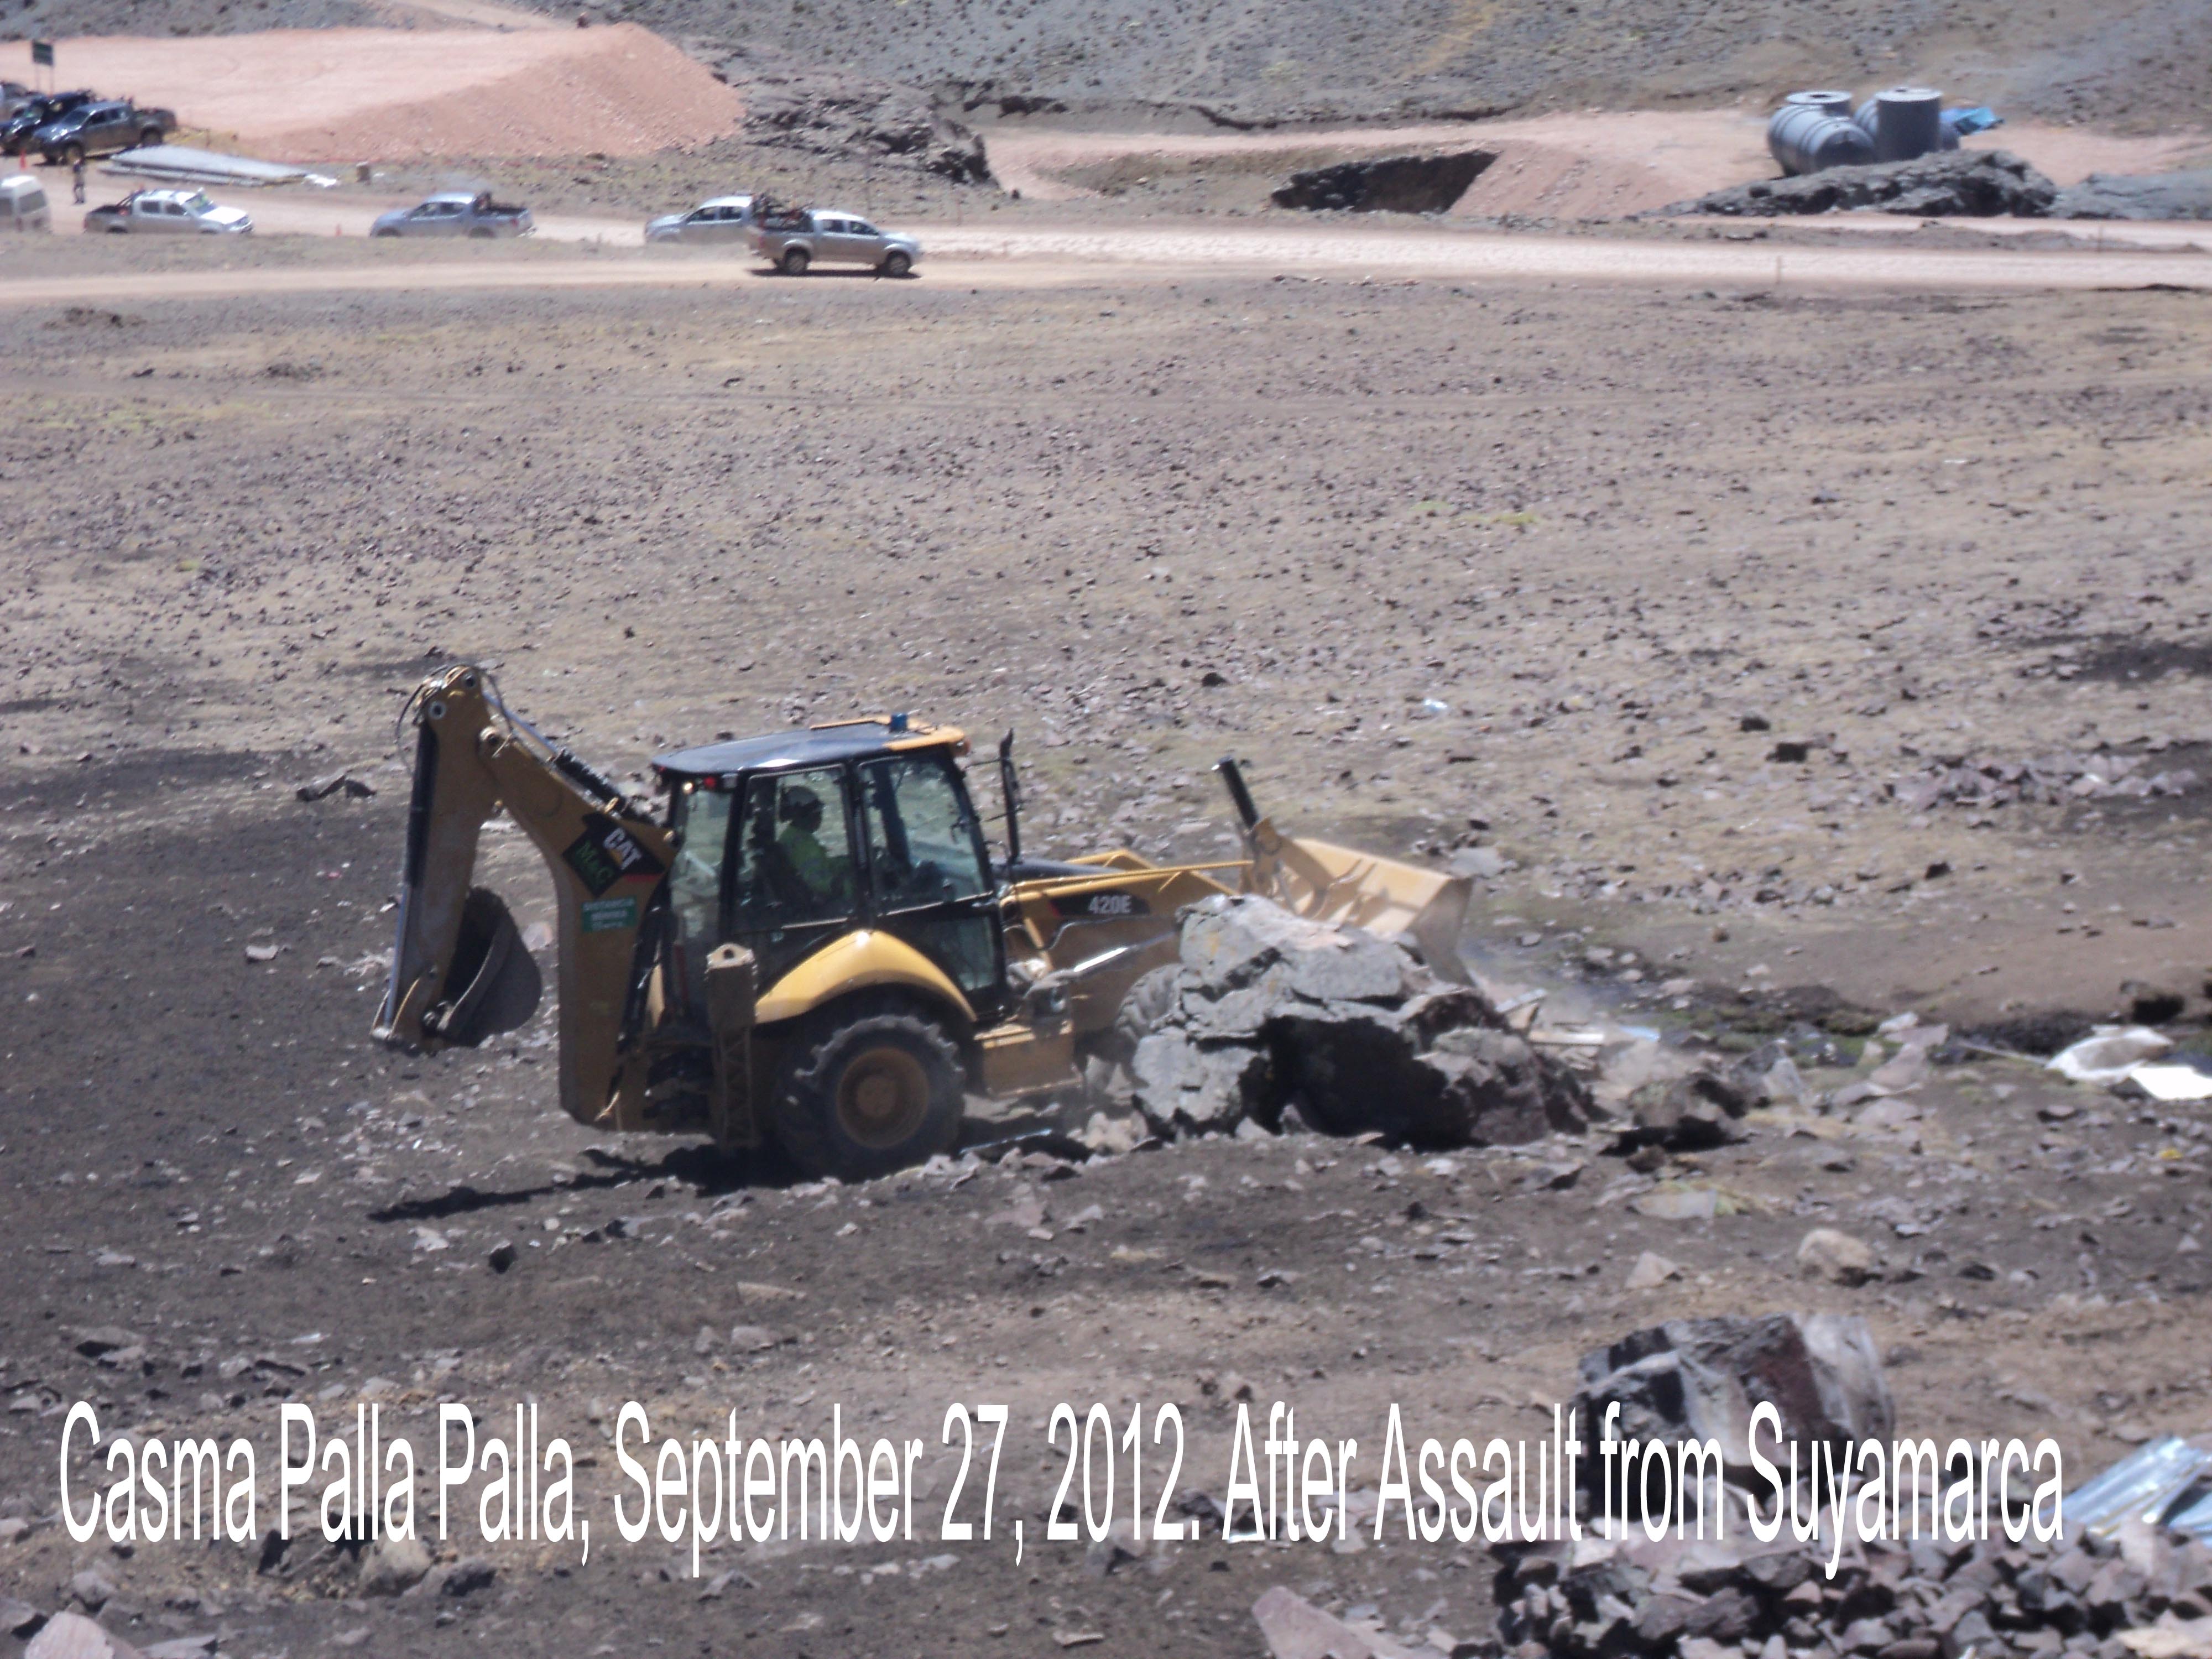 Constructicon destroying a Casma Palla Palla home in Peru. Vehicle pertains to Suyamarca SAC, a subsidiary of Hochschild Mining PLC and International Minerals.